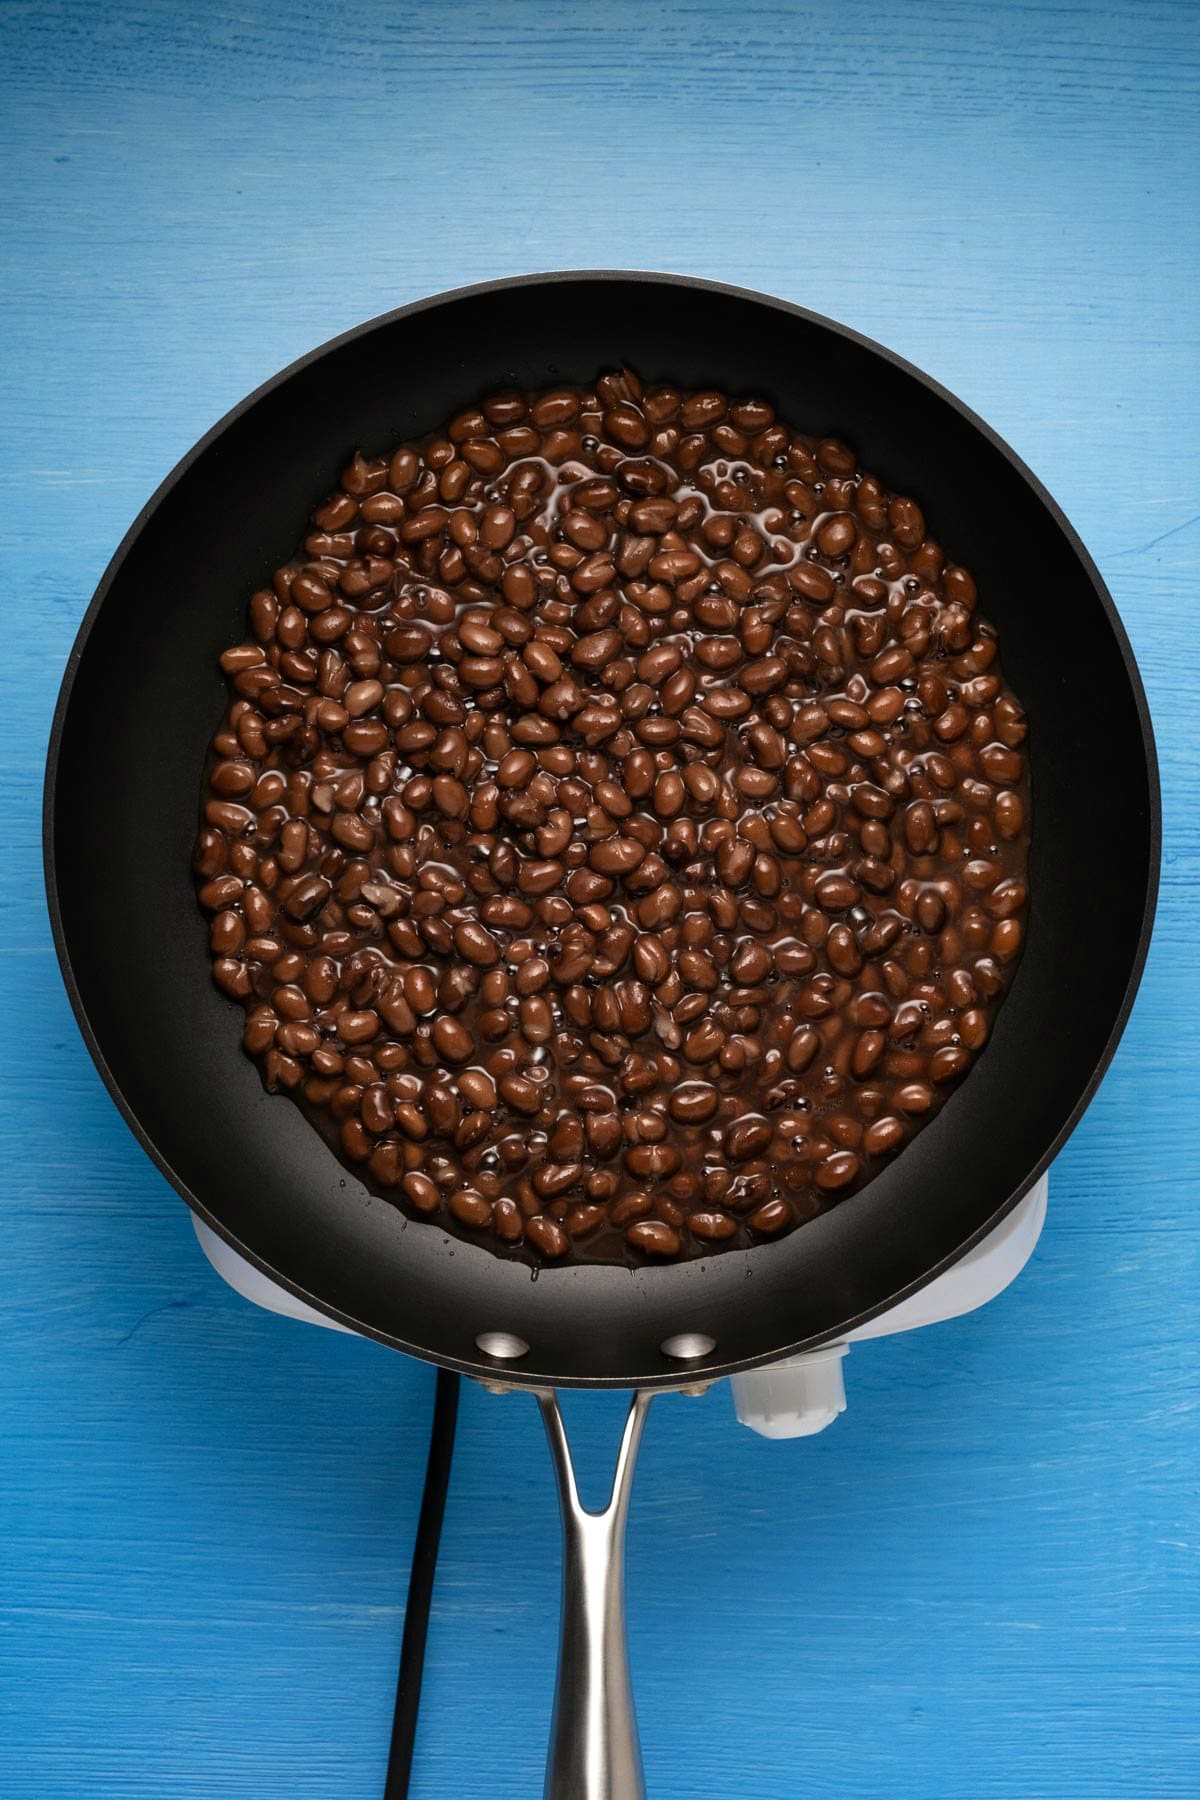 Canned black beans in a pan.